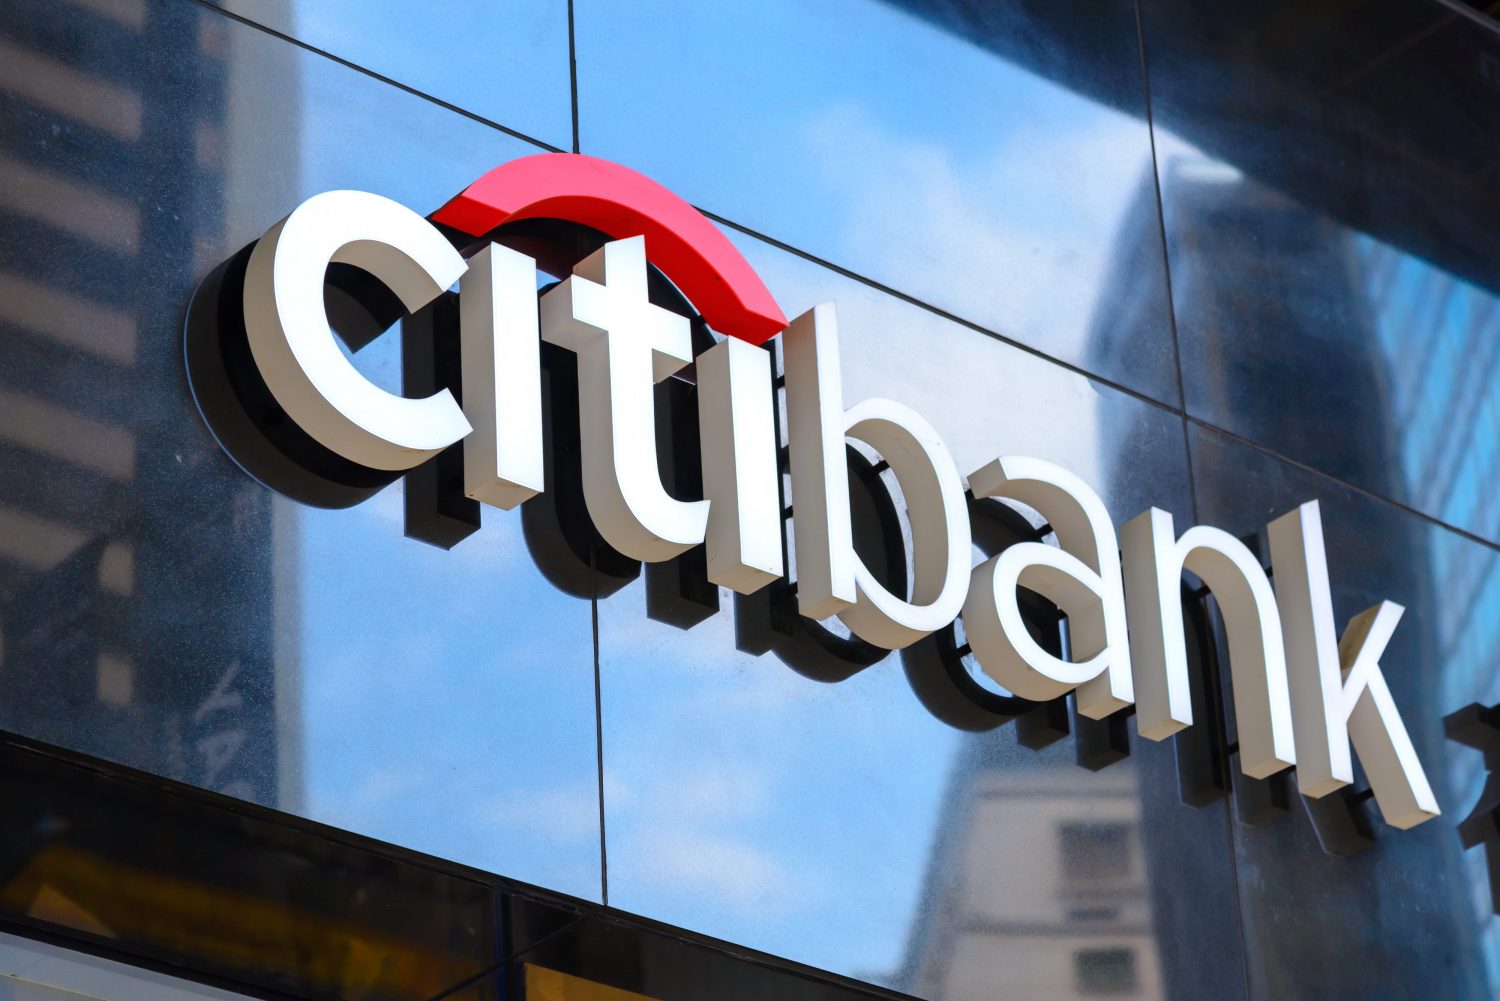 If you have been lucky enough to snag a new credit card with Citi Bank, you are front in line to get Citi Credit. Here's all you need to know.